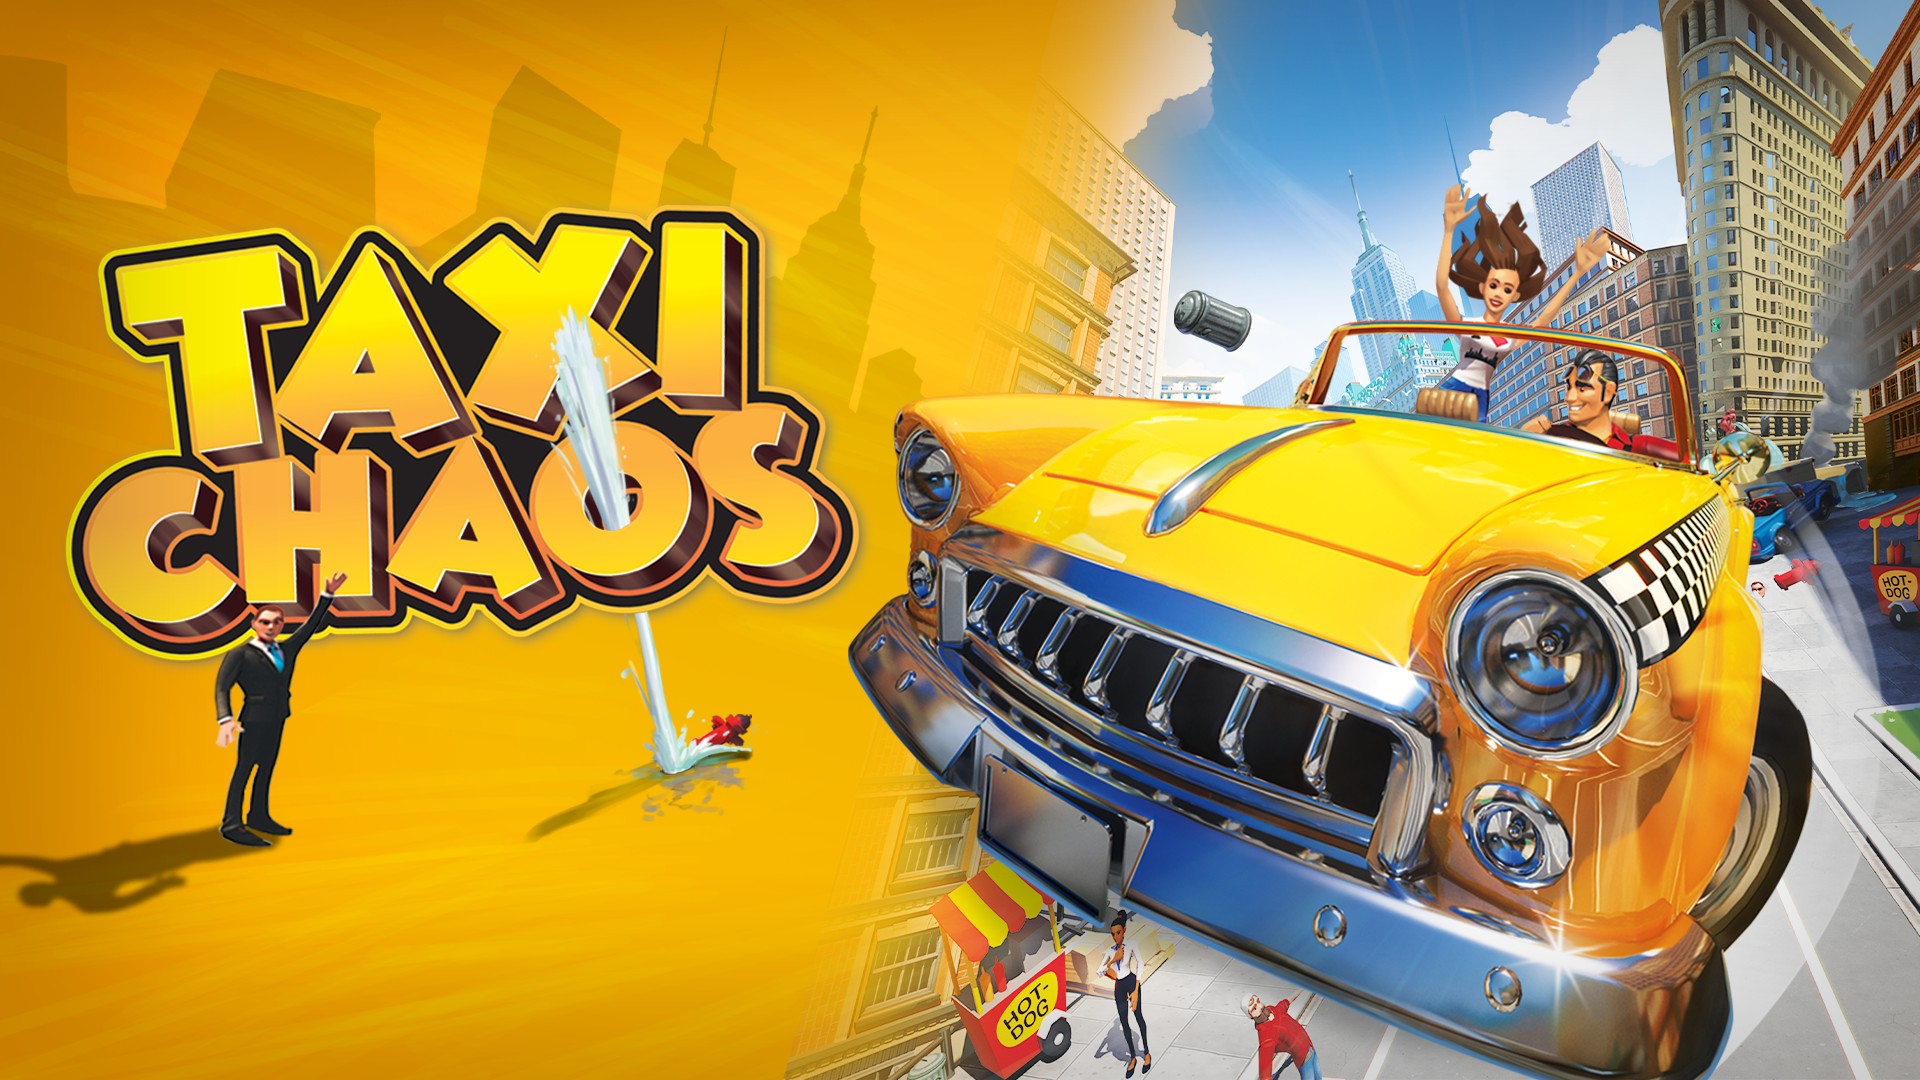 Video For Taxi Chaos: Bringing Back the Long-Lost Taxi Genre